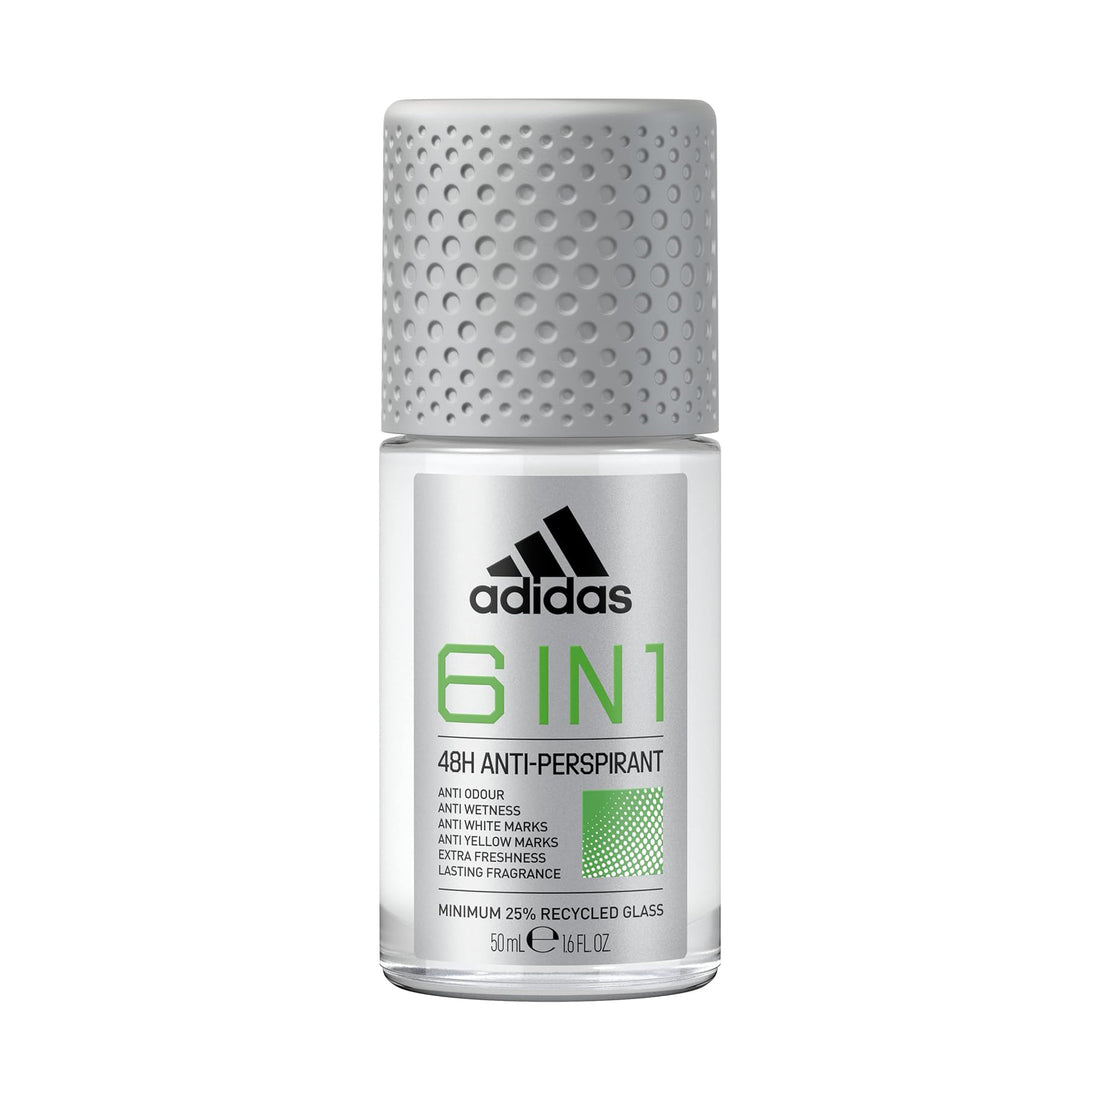 Adidas 6 in1 48H Anti-Perspirant Roll-On (50ml)